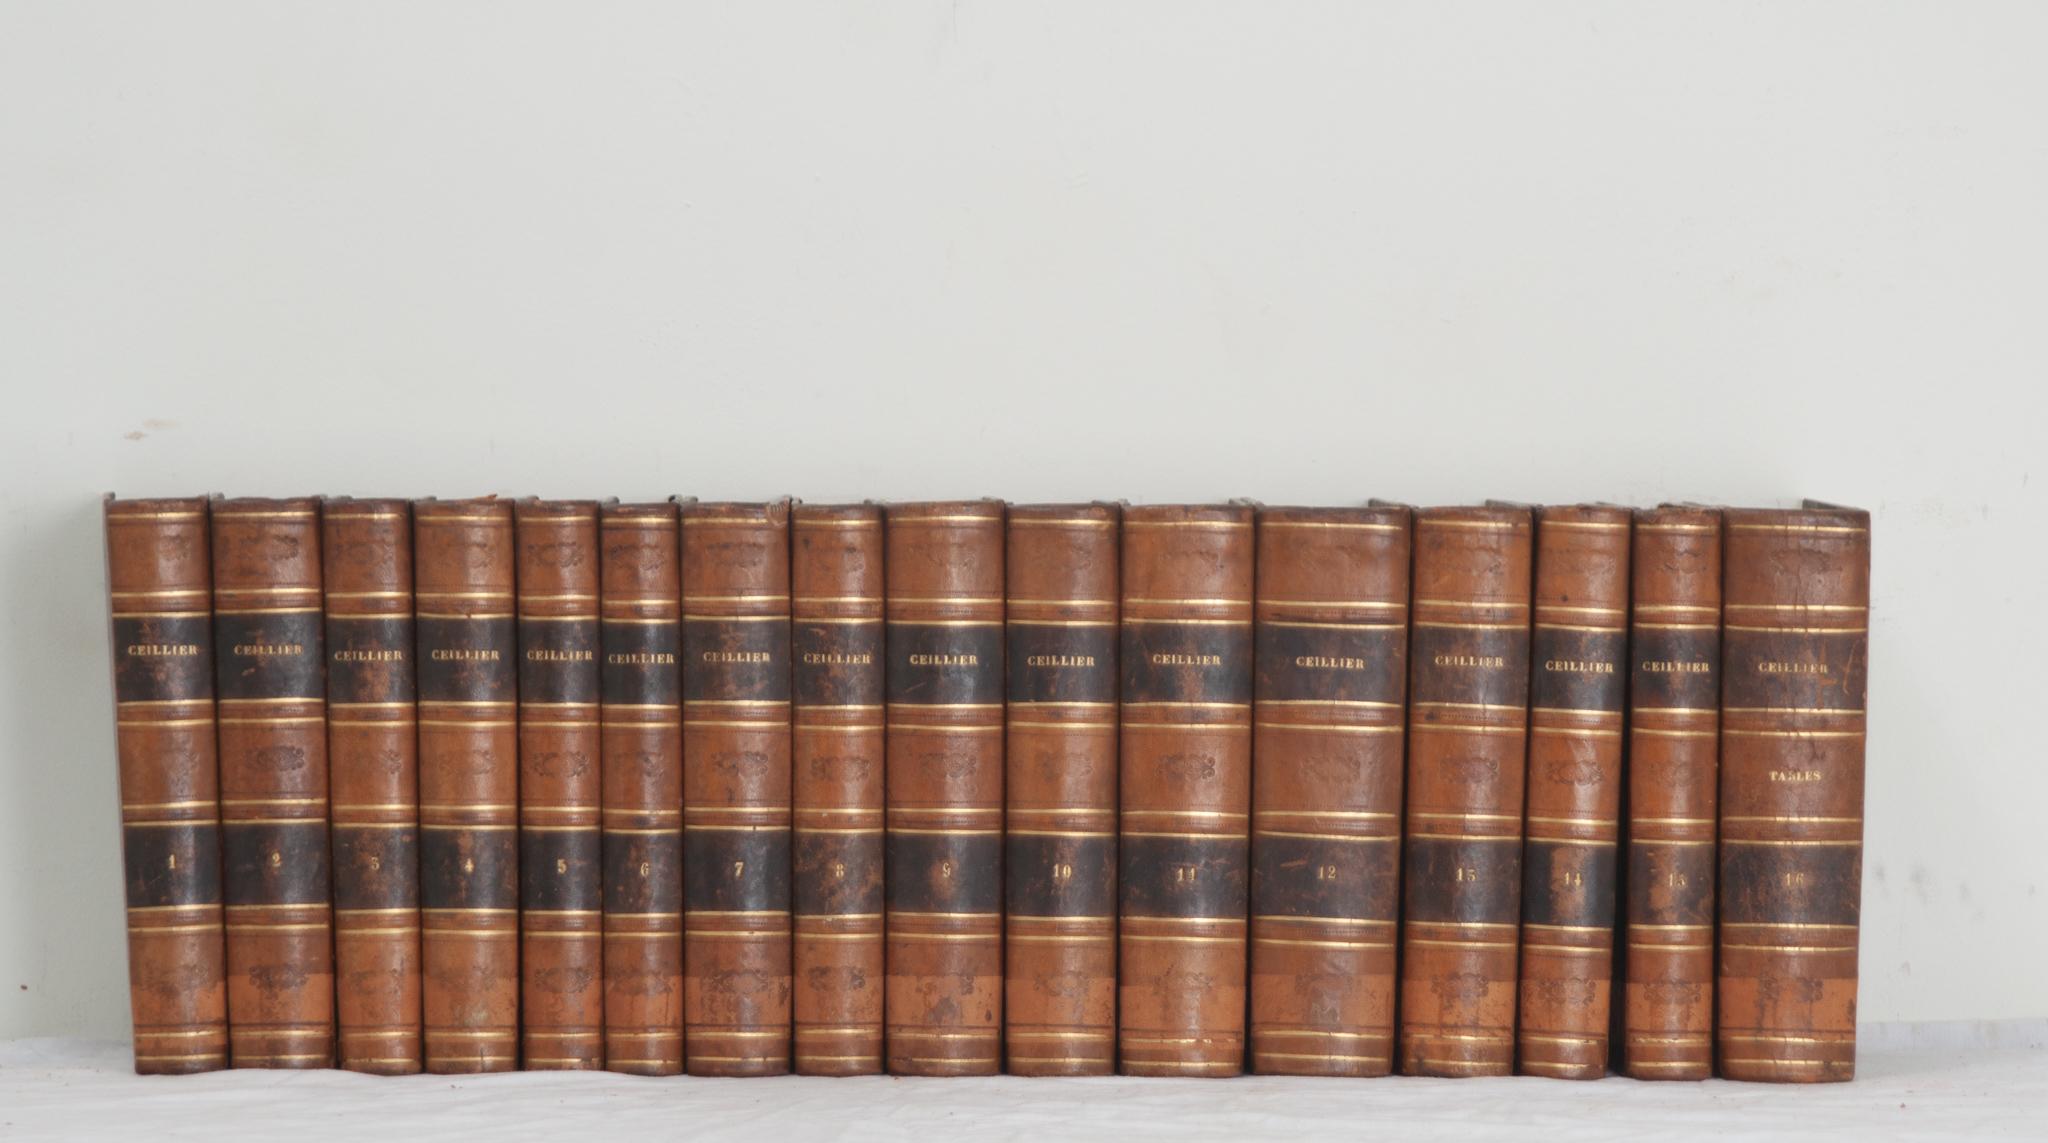 Other Set of 16 French 19th Century History Books For Sale